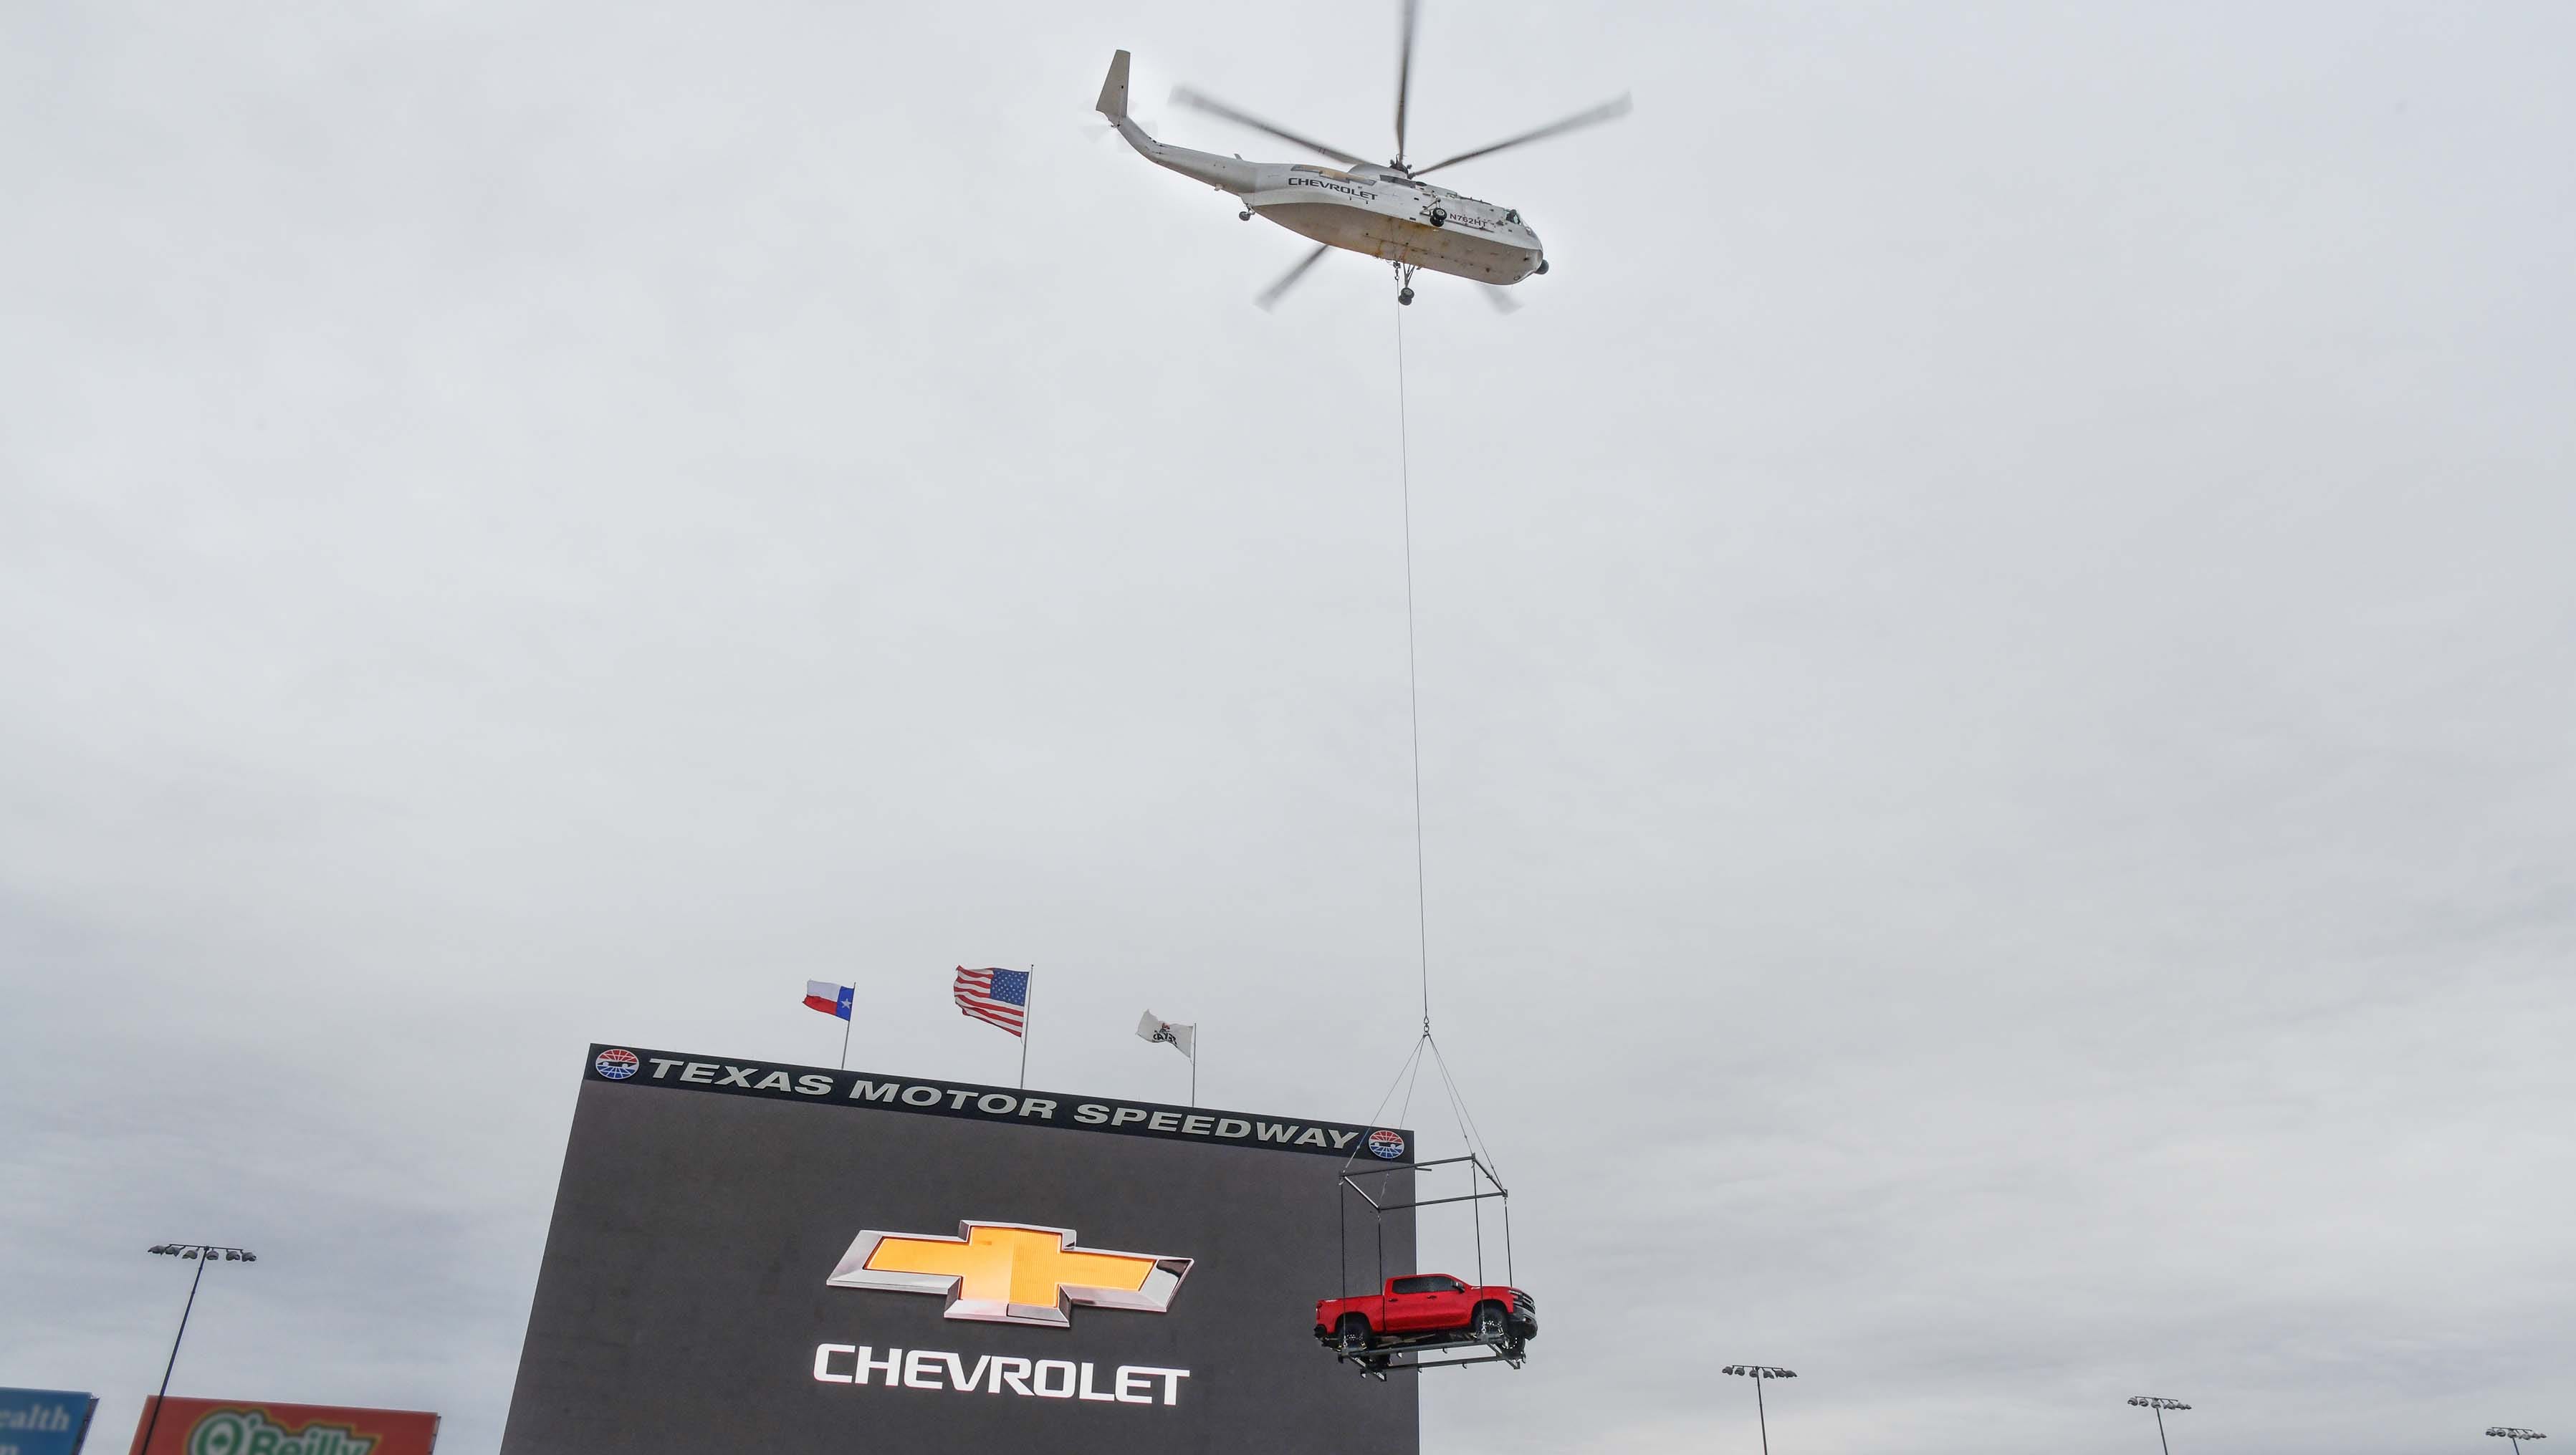 The new, 2019 Chevy Silverado was carried into Texas Motor Speedway by helicoptor.